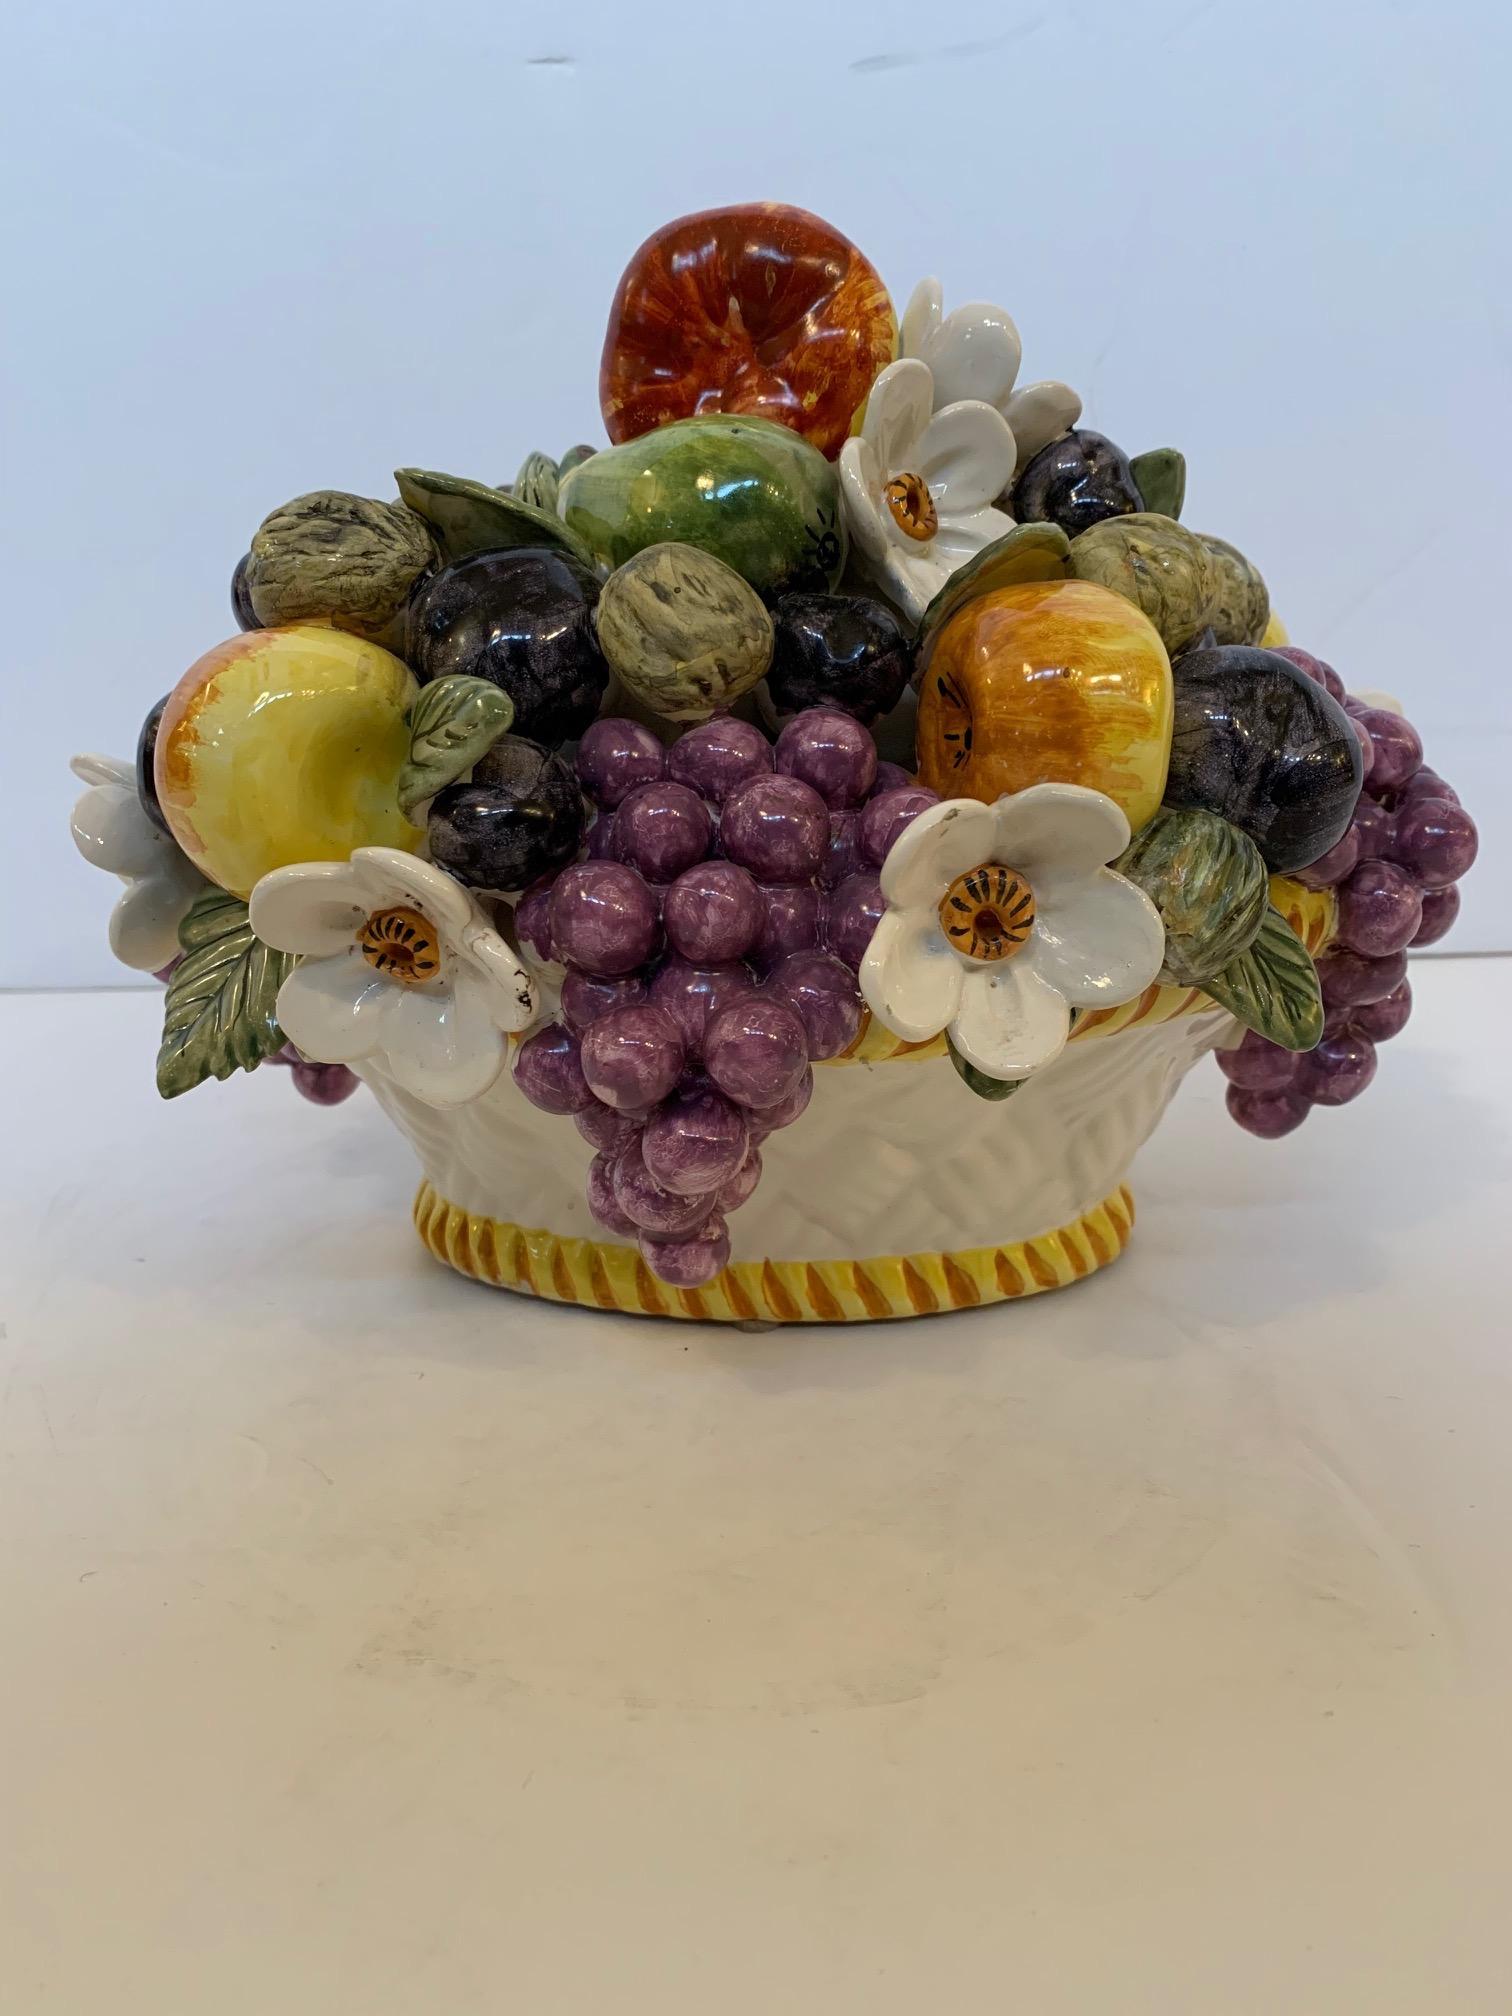 A beautiful Majolica style ceramic bowl of fruit and flowers from France having incredible coloration and detail. Says fait main and made in France on the bottom.